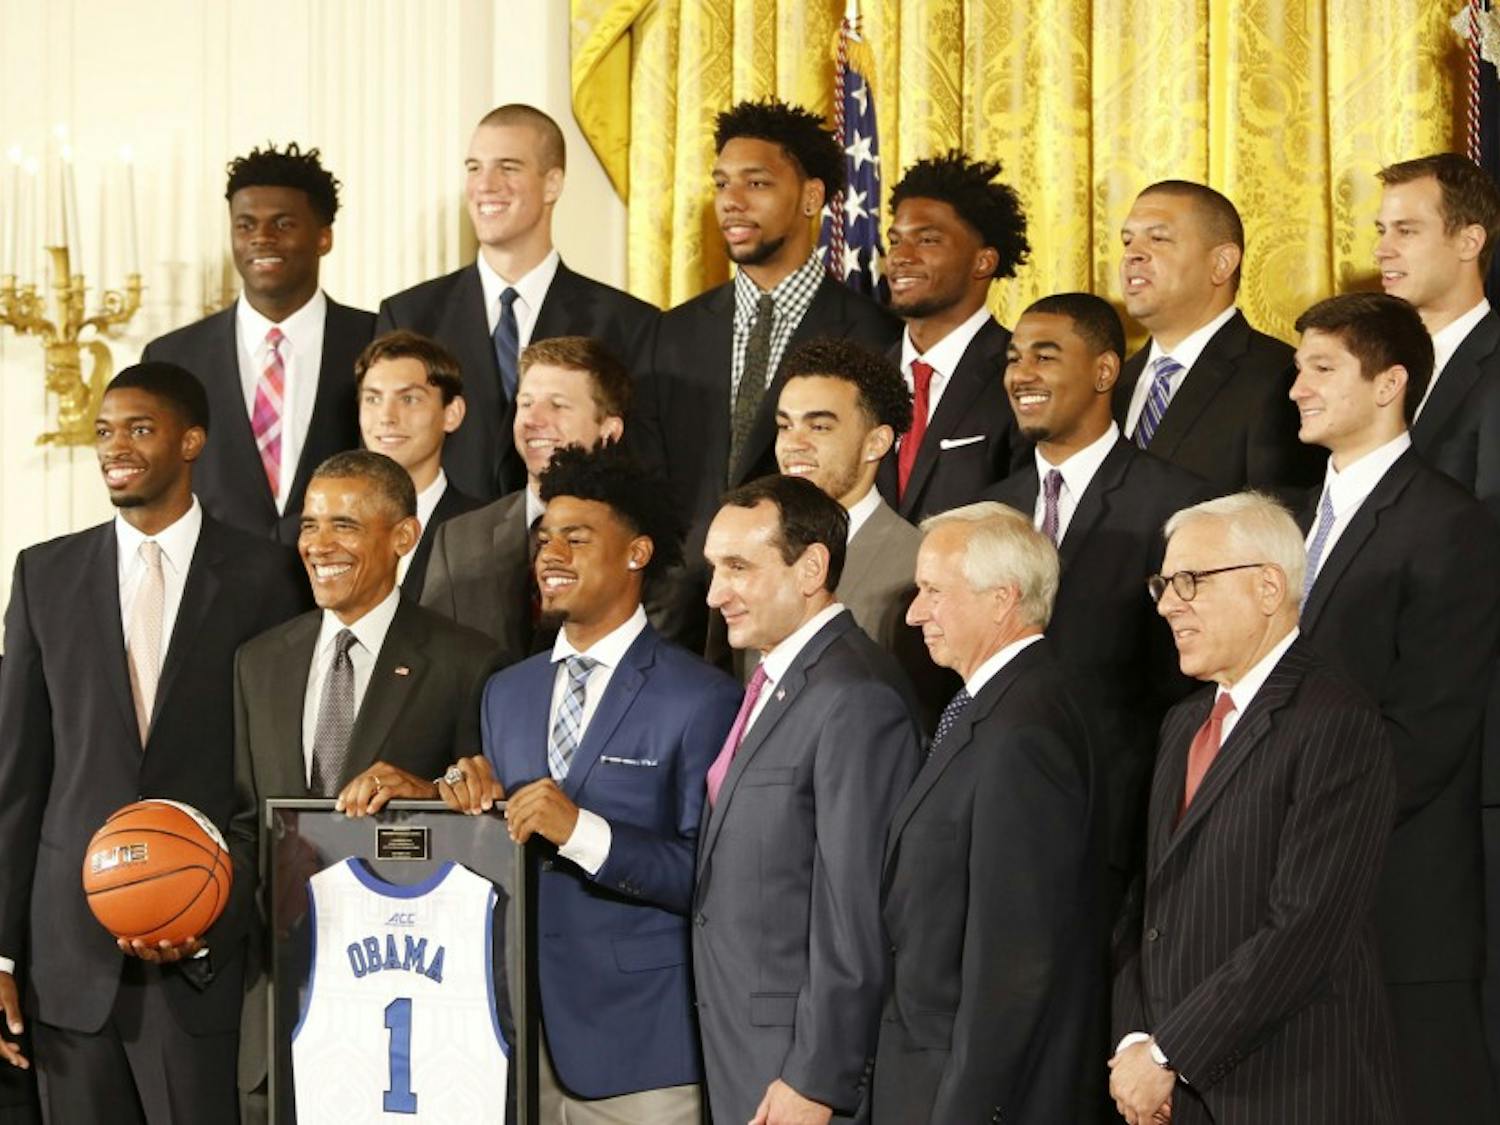 Duke visited President Barack Obama at the White House in September to celebrate the 2015 national title&mdash;one of outgoing sports editor Ryan Hoerger’s favorite memories.